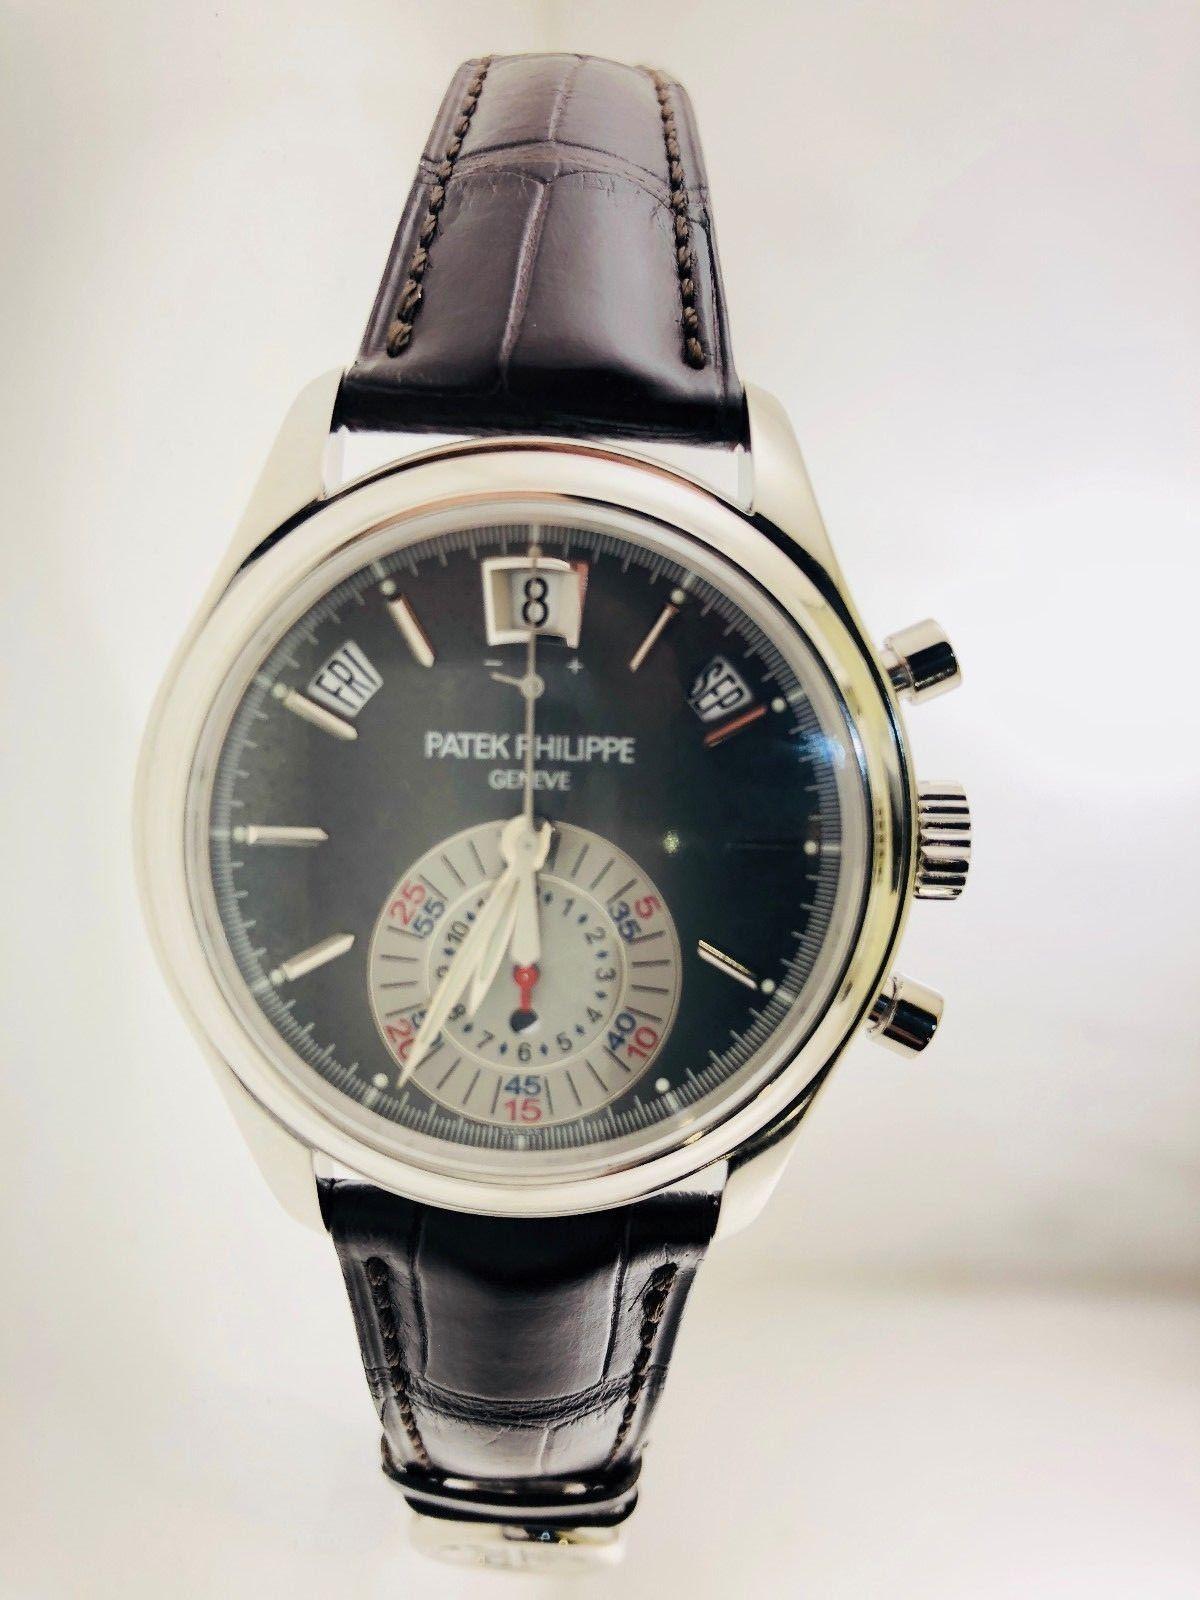 PATEK PHILIPPE PLATINUM ANNUAL CALENDAR CHRONOGRAPH 5960P-001 WATCH

ITEM DESCRIPTION: 

Patek Philippe is one of the finest watchmakers in the world. This type of watch is discontinued and has not been sold by the company for the past couple of